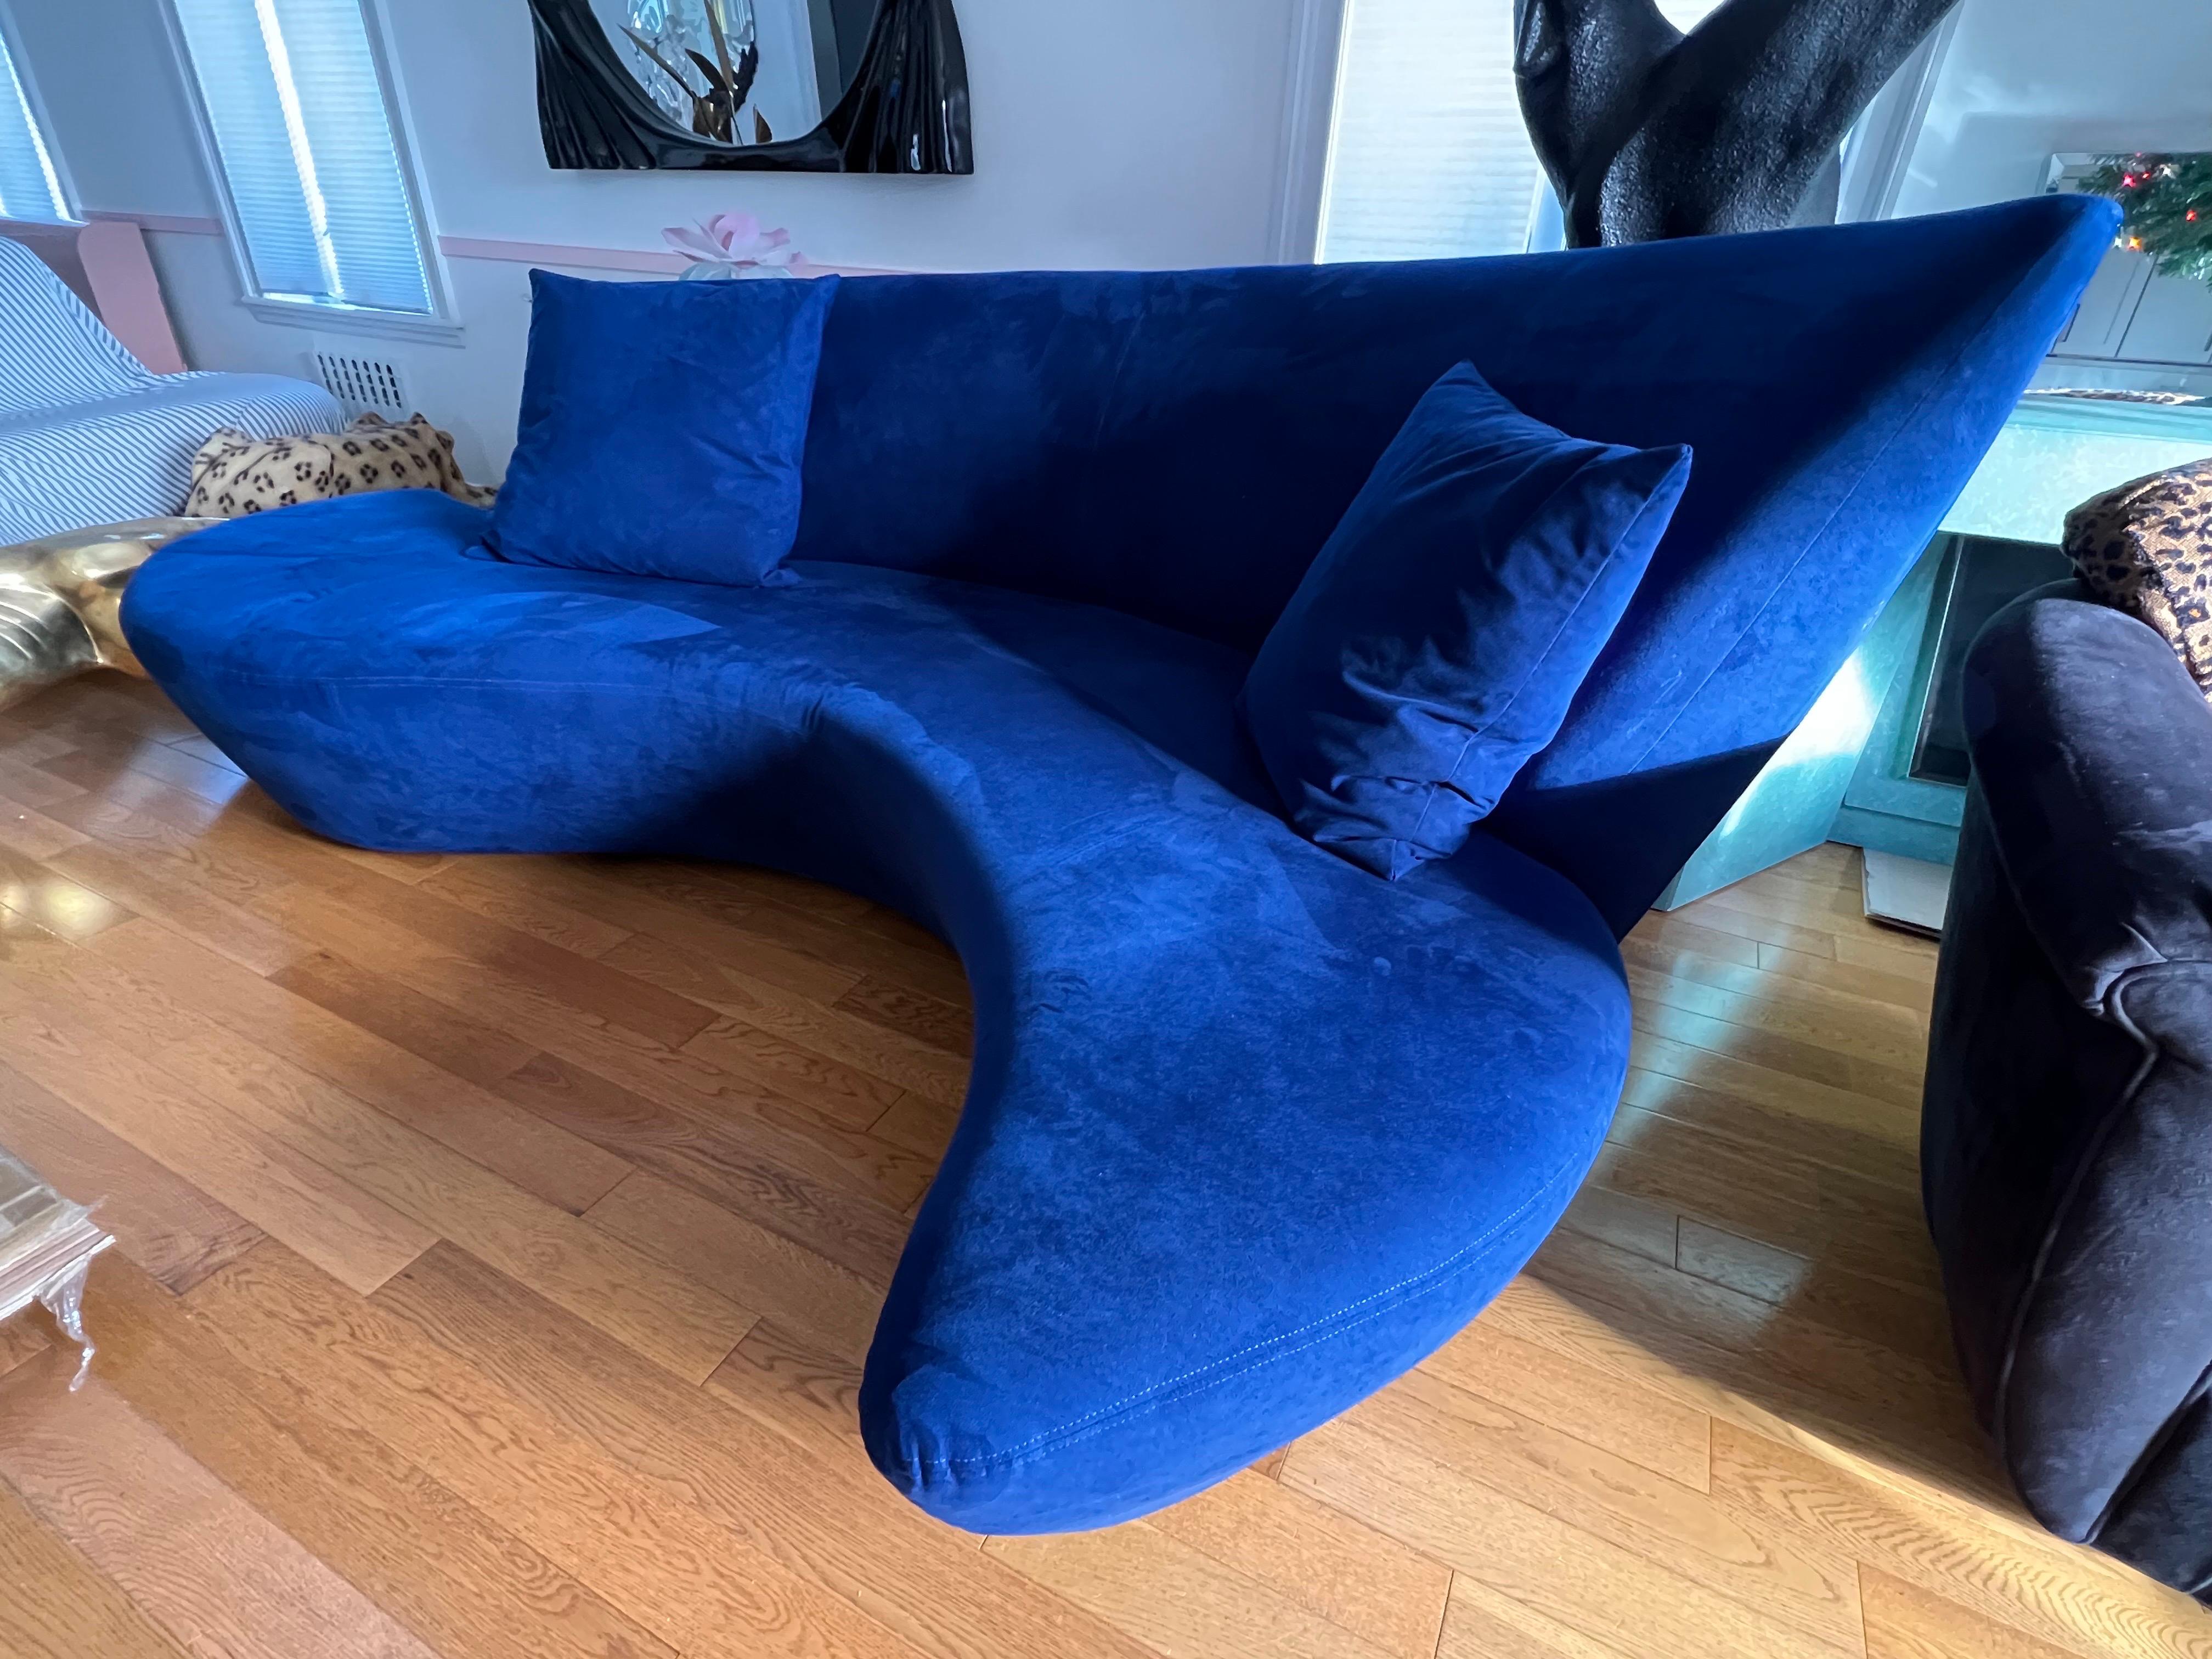 Postmodern Vladimir Kagan Bilbao sofa by Preview. The sofa is covered with ultra suede and is very clean. Please check all the photos for the condition.